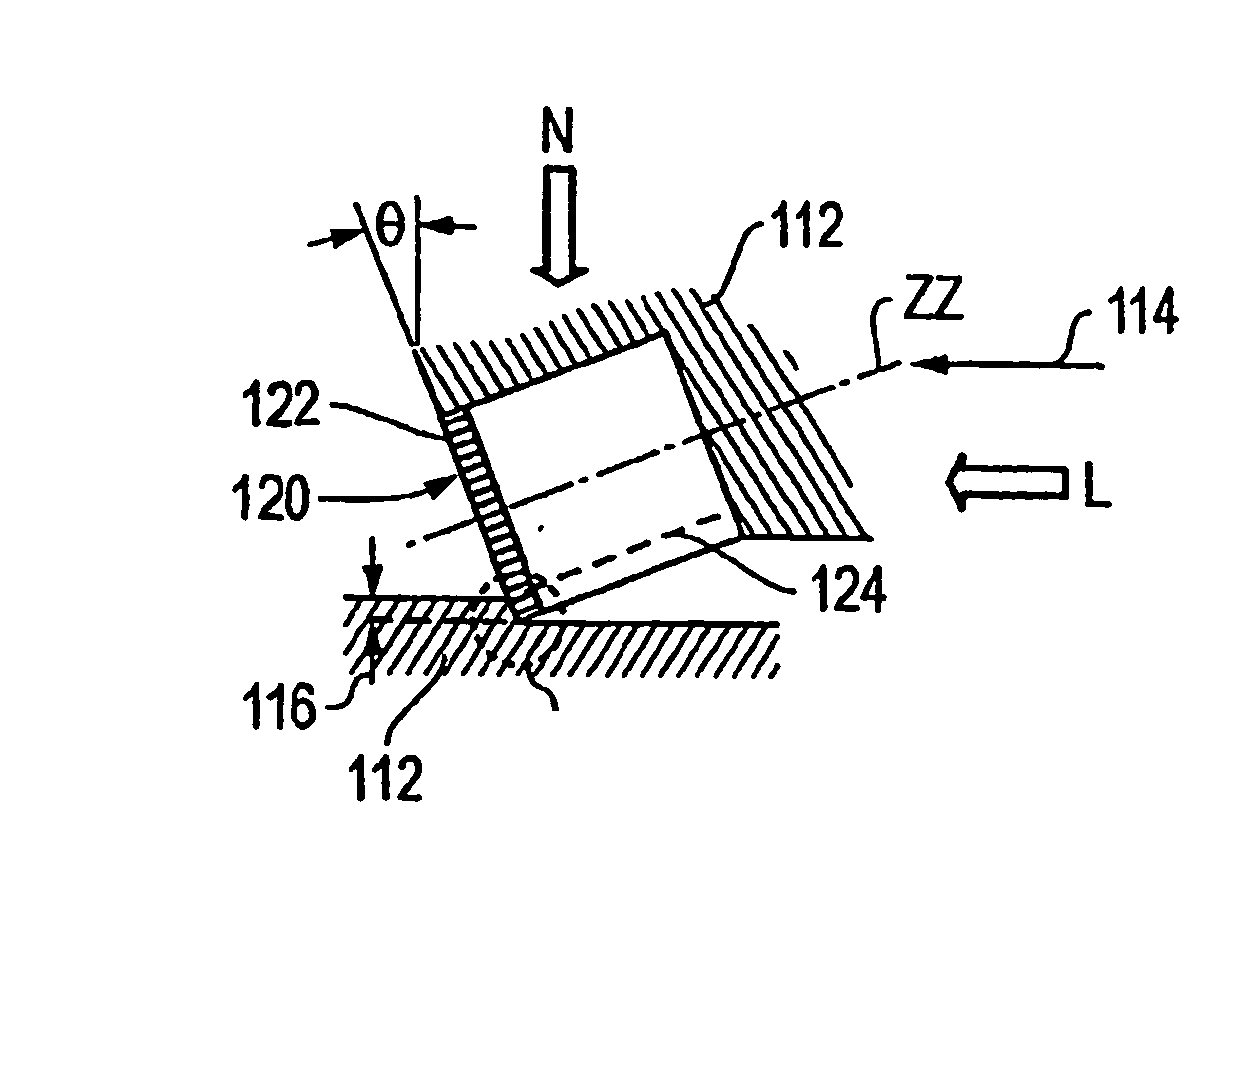 Method, System, and Apparatus of Cutting Earthen Formations and the like